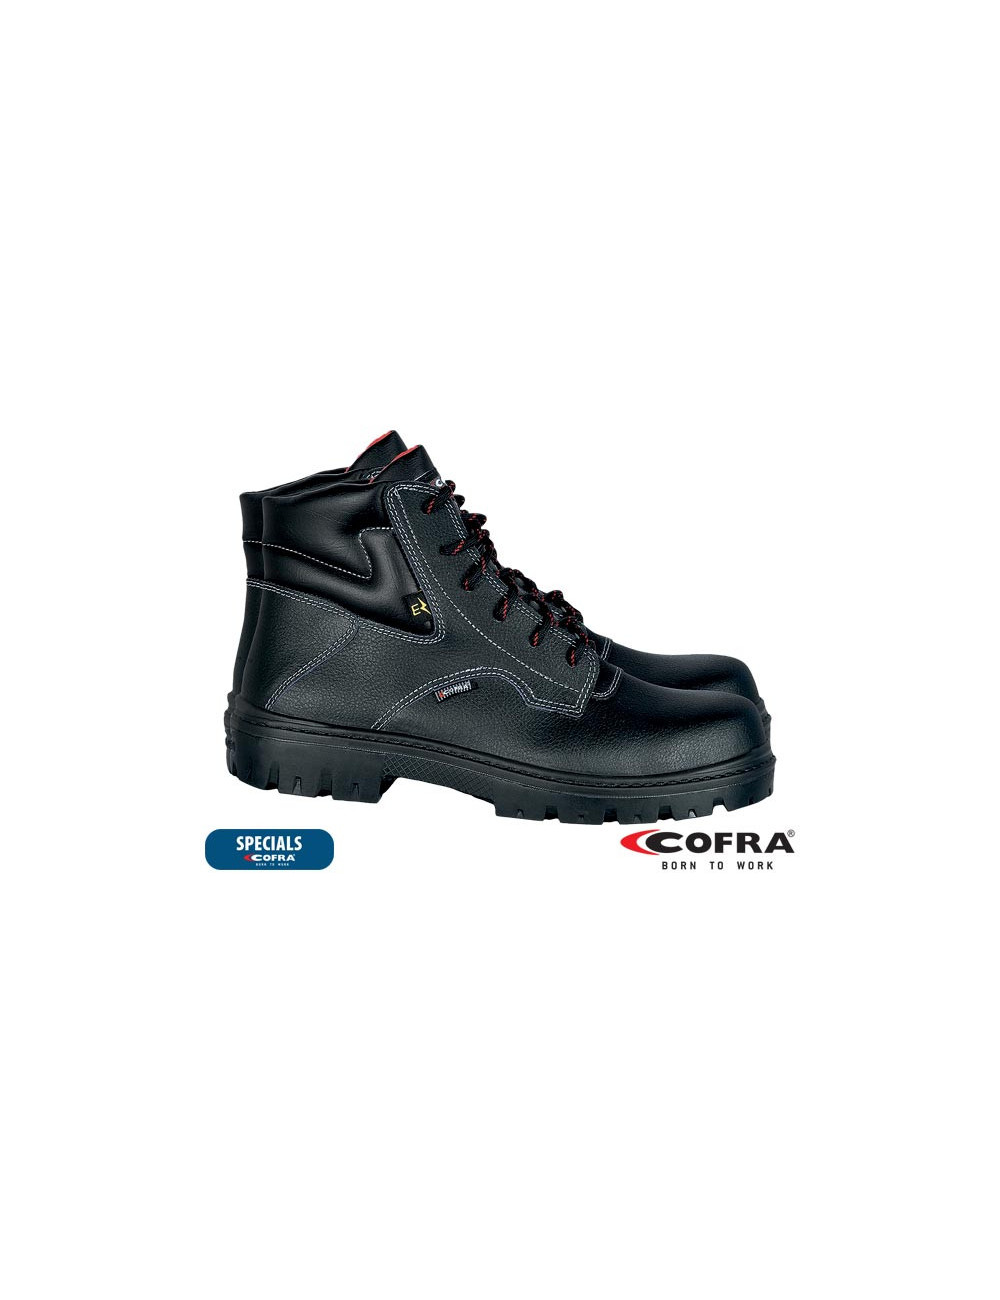 Brc-electrica safety shoes Cofra